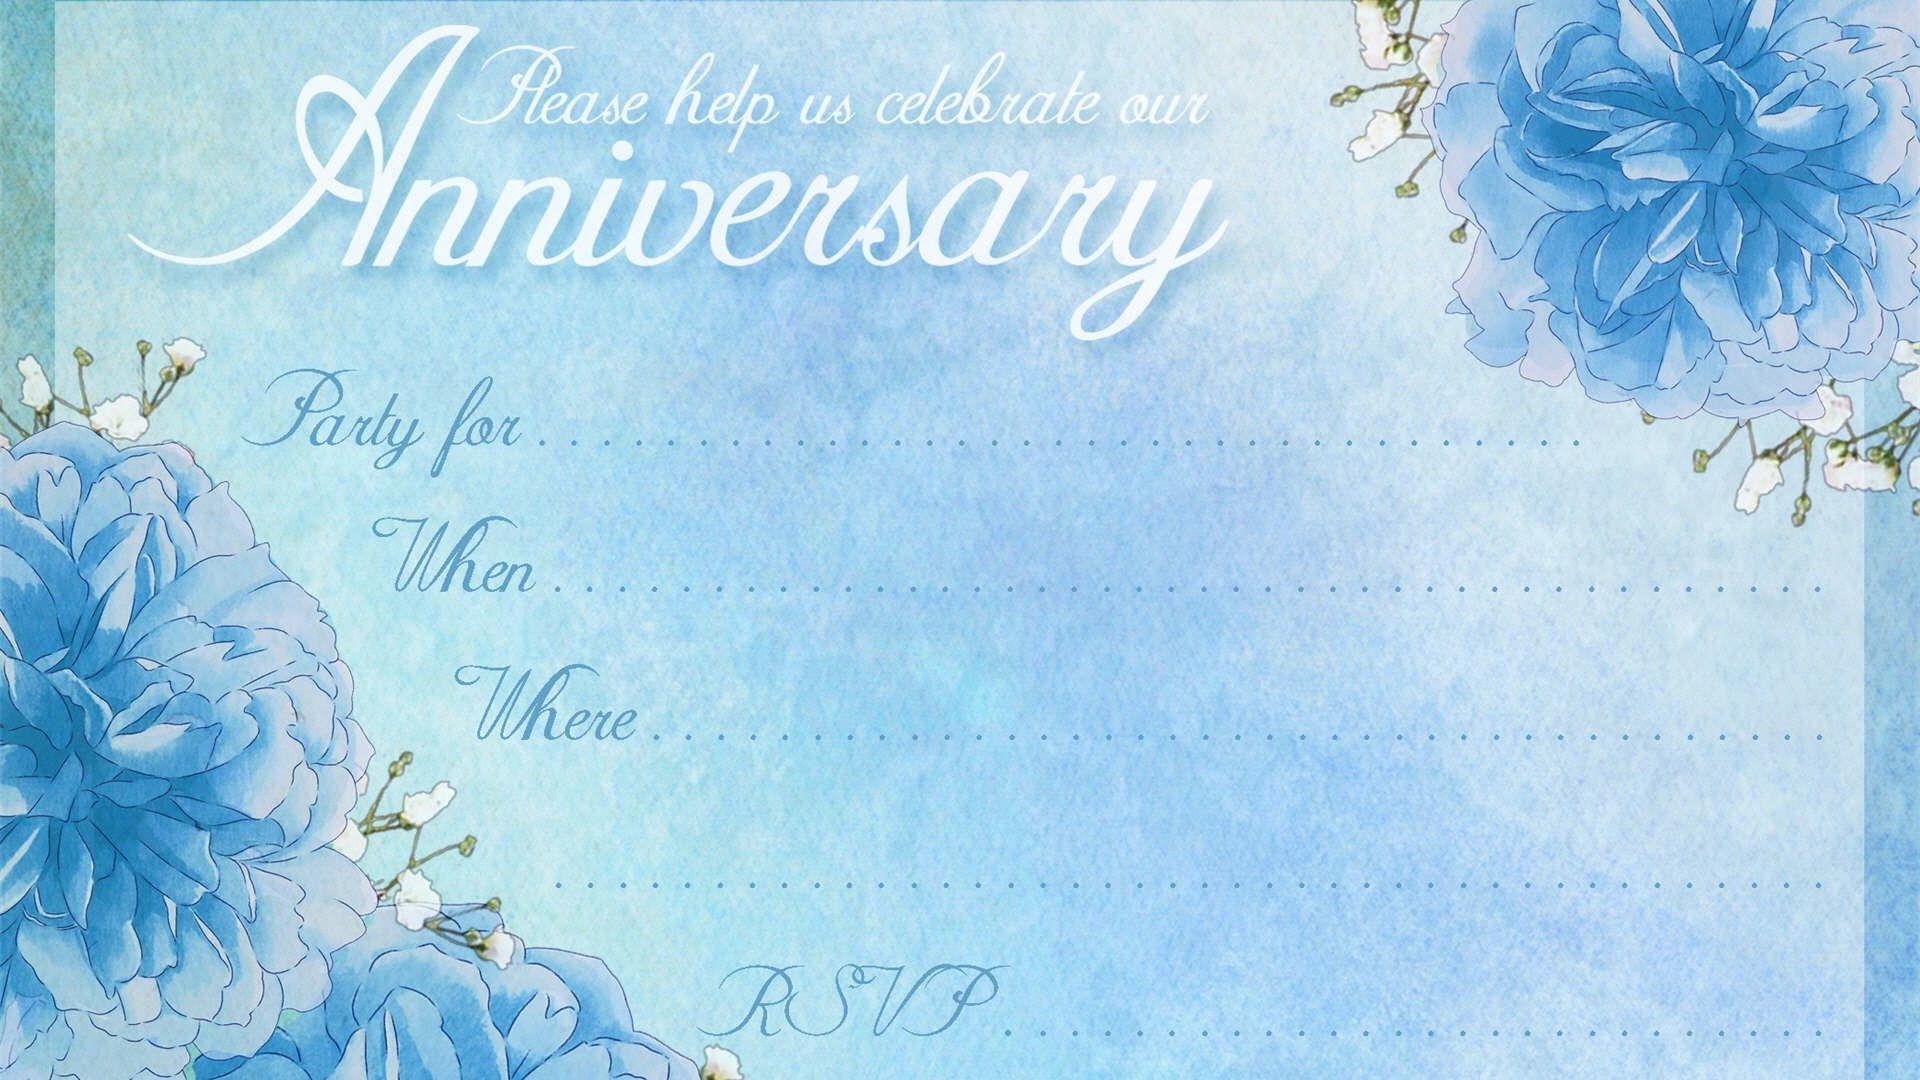 Anniversary best wishes and greetings card HD wallpaperNew HD